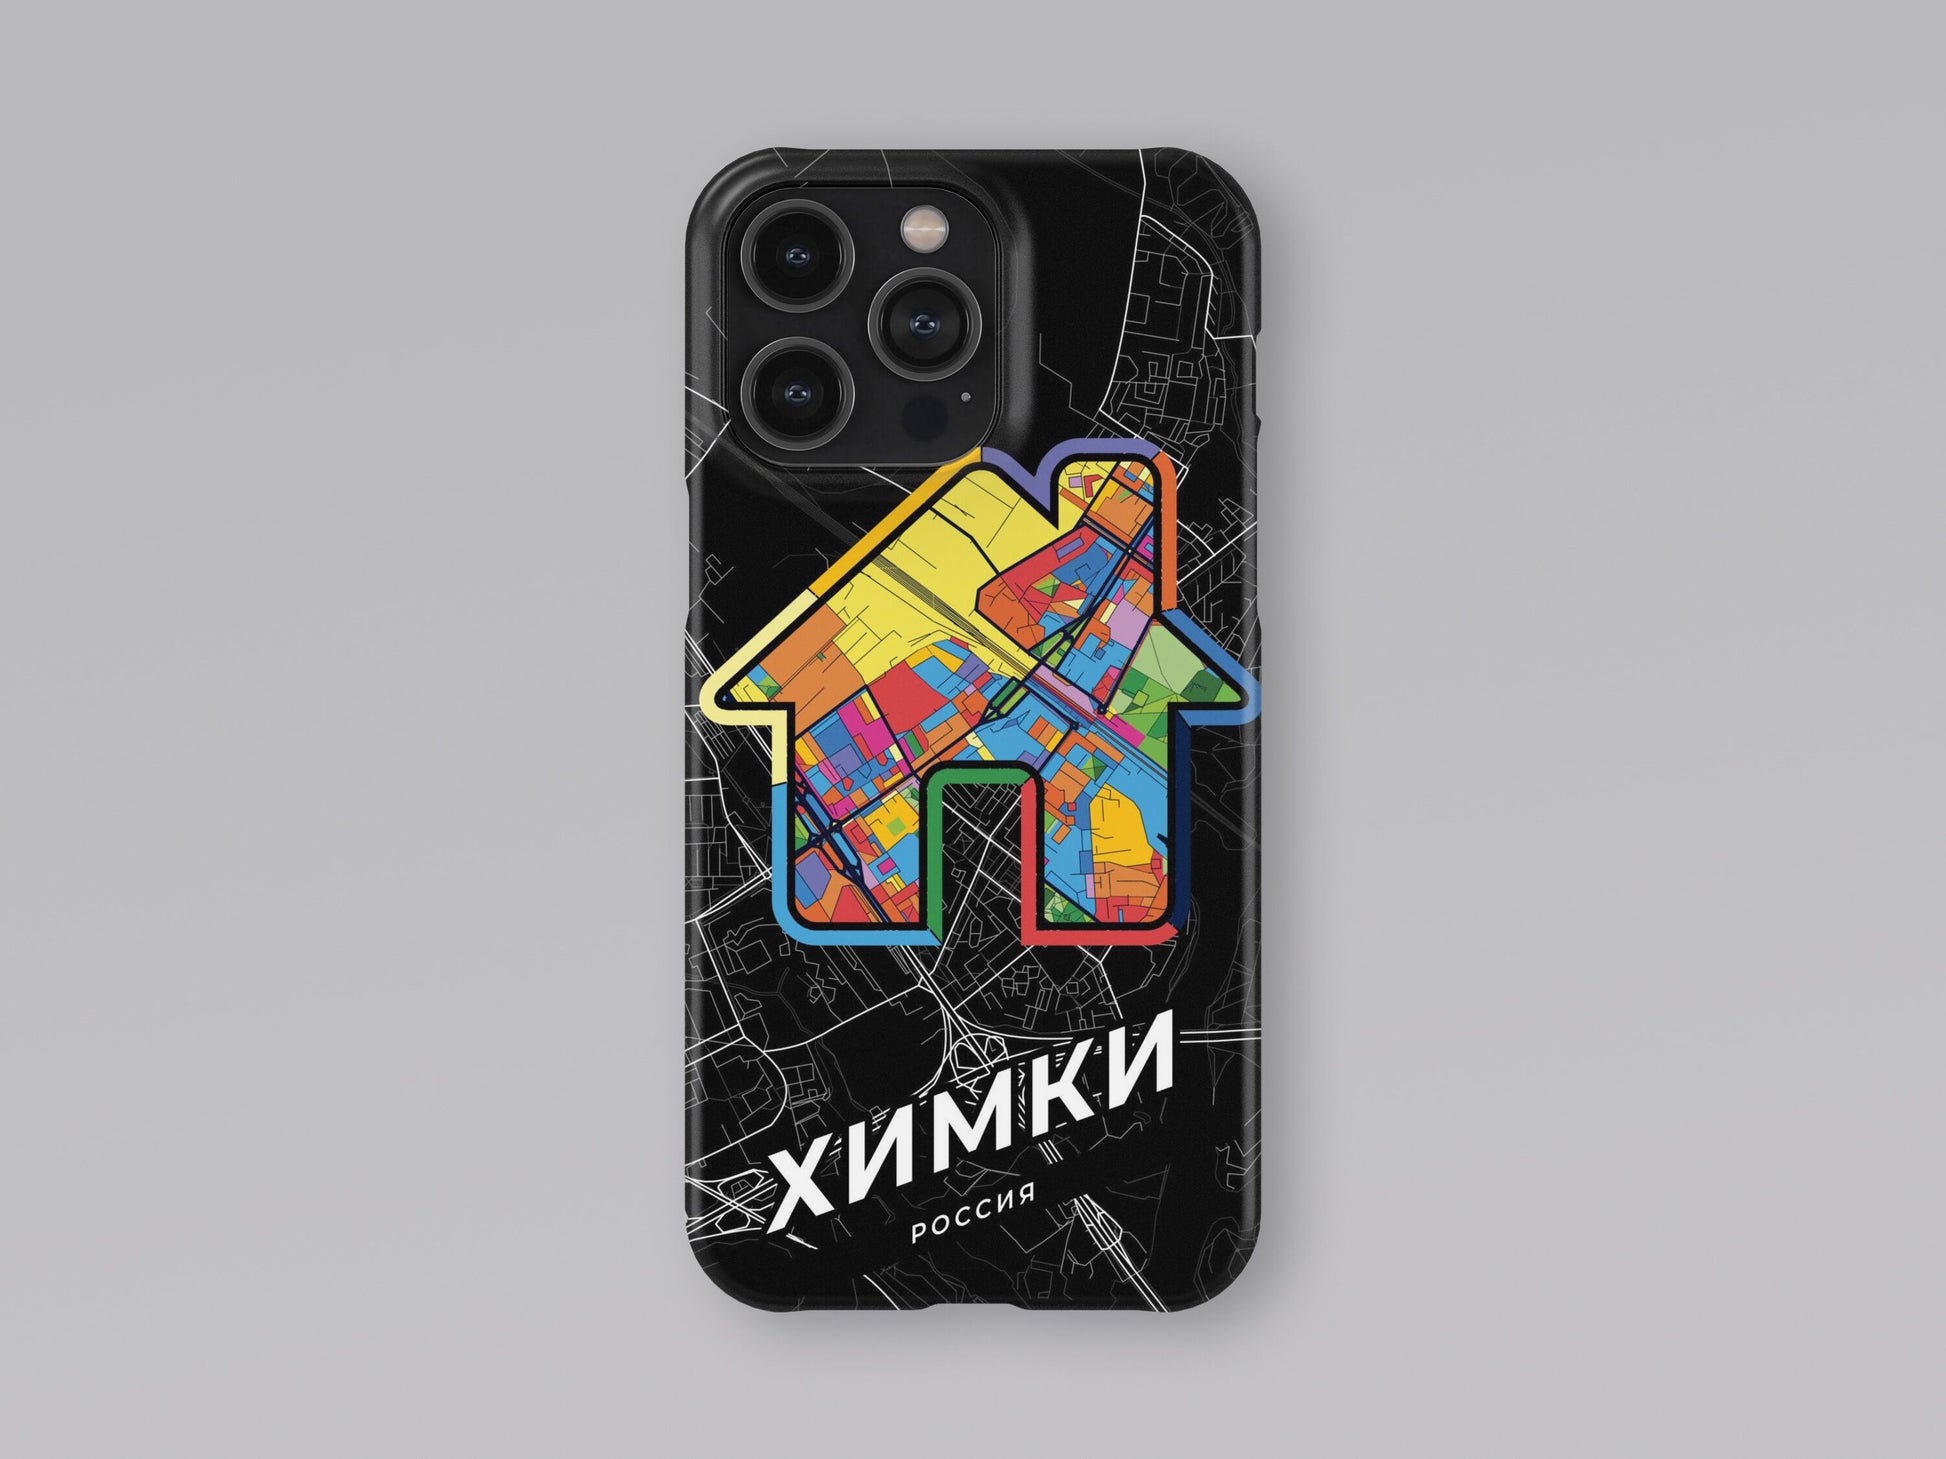 Khimki Russia slim phone case with colorful icon. Birthday, wedding or housewarming gift. Couple match cases. 3